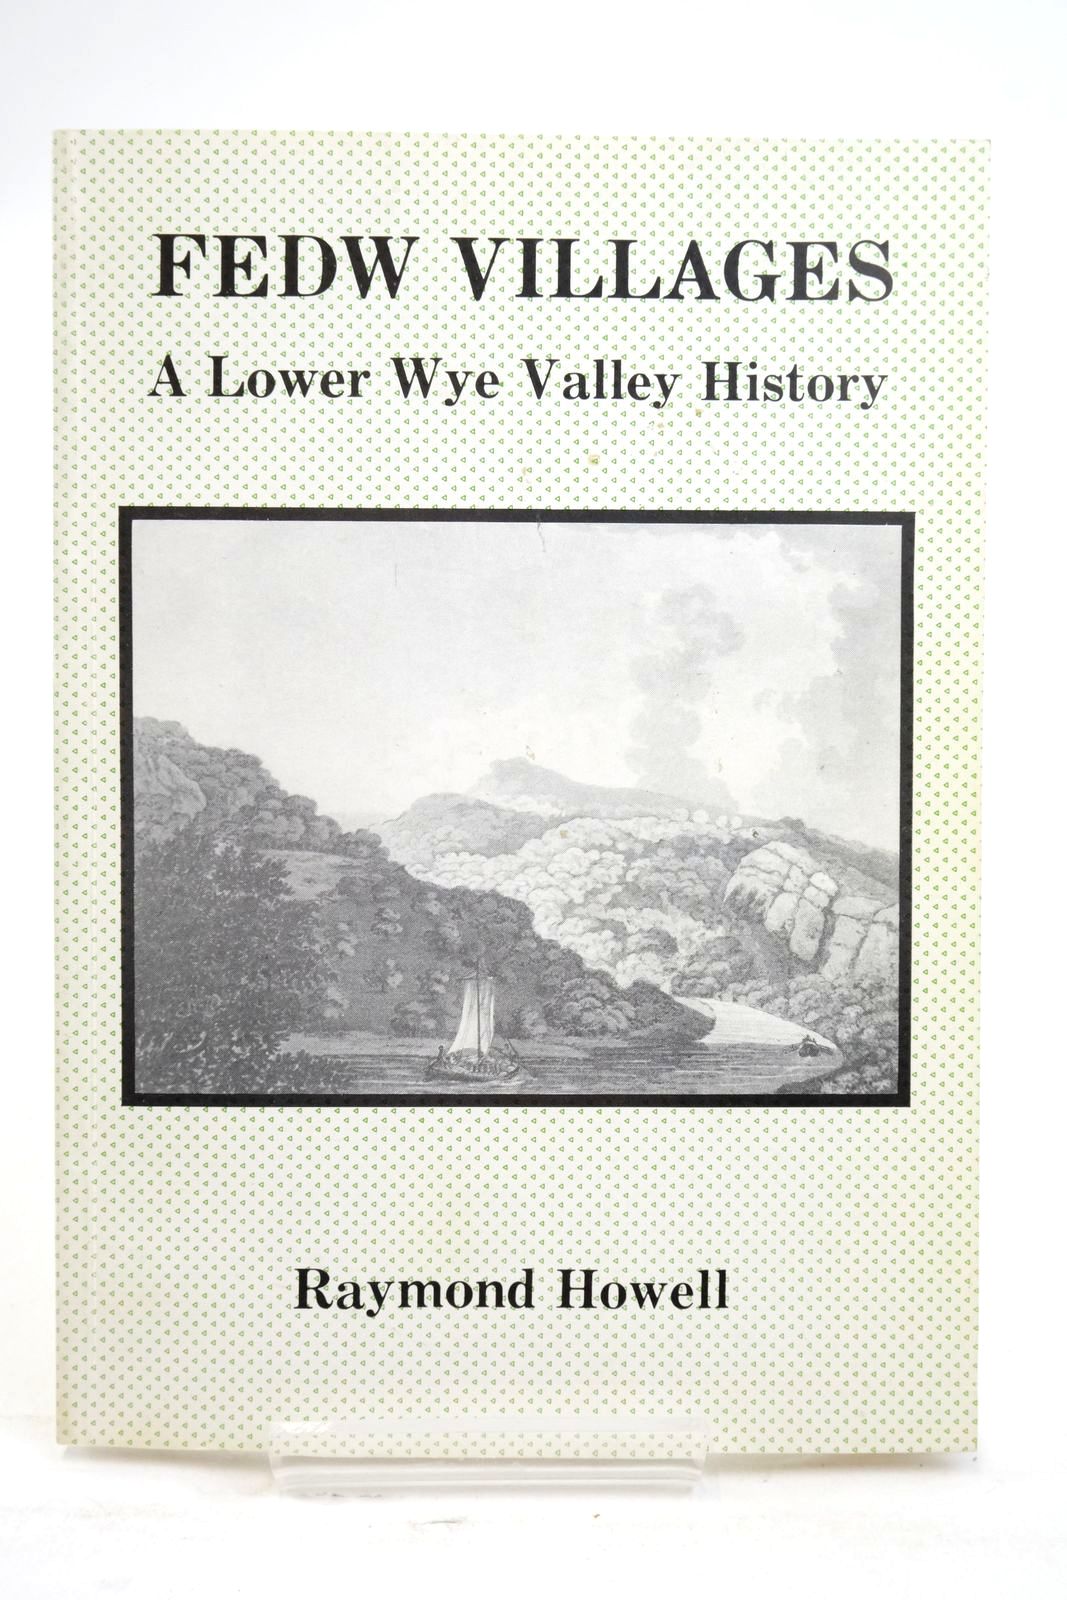 Photo of FEDW VILLAGES A LOWER WYE VALLEY HISTORY written by Howell, Raymond published by Village Publishing (STOCK CODE: 2137106)  for sale by Stella & Rose's Books